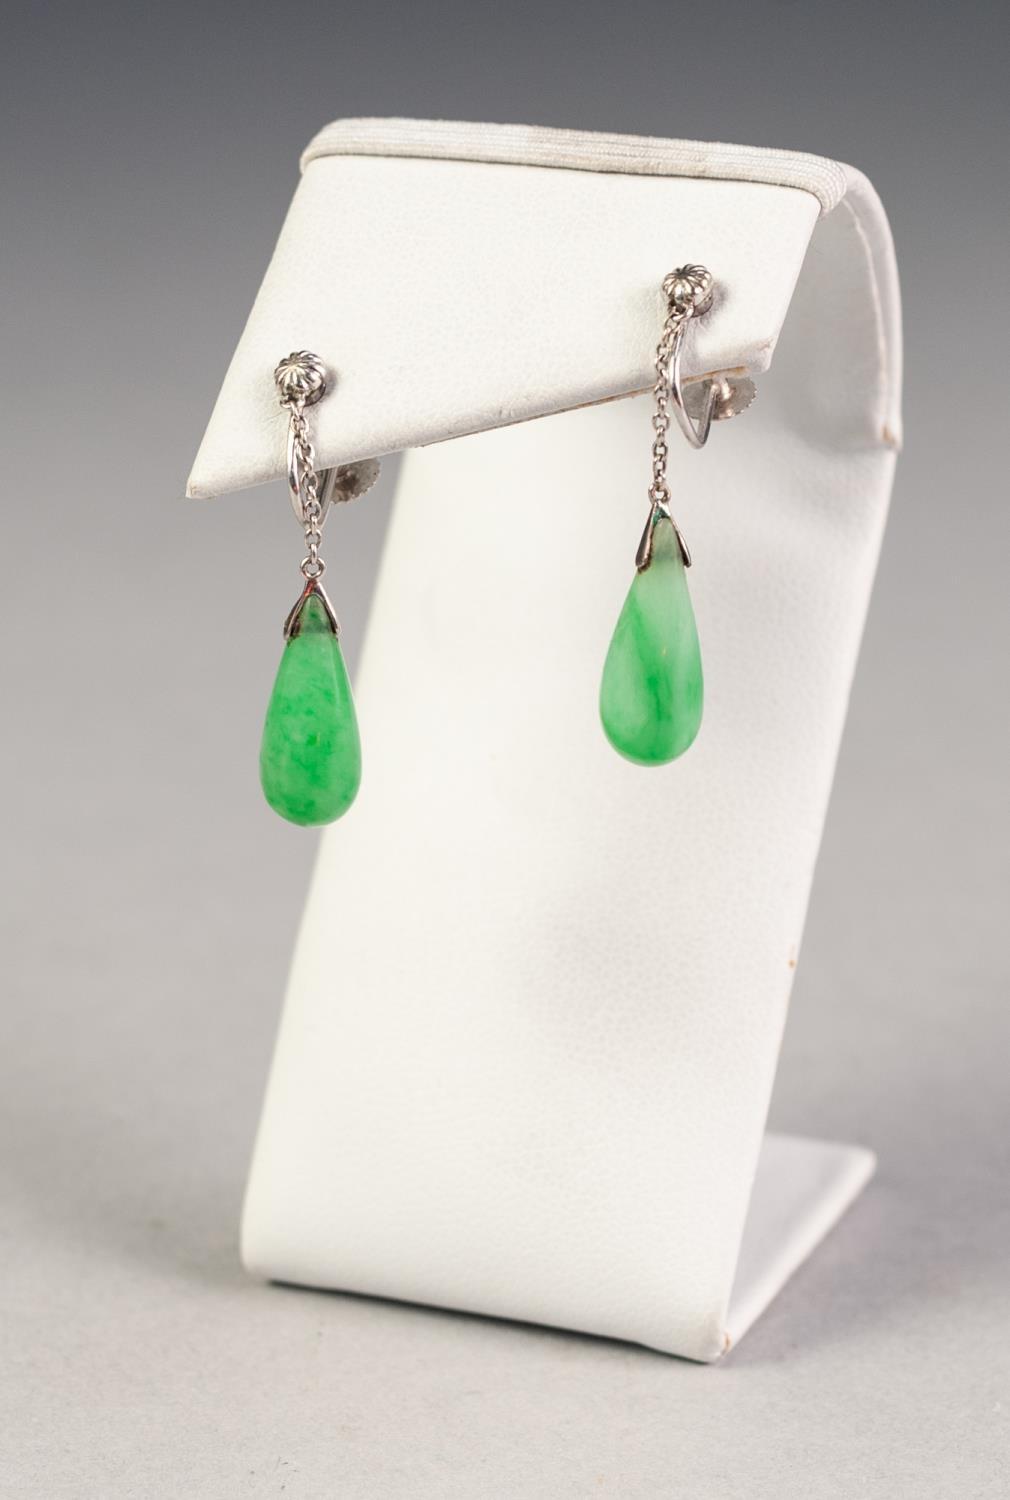 PAIR OF 9ct WHITE GOLD SCREW EARRINGS with fine chain drops suspending a tear shaped green jade